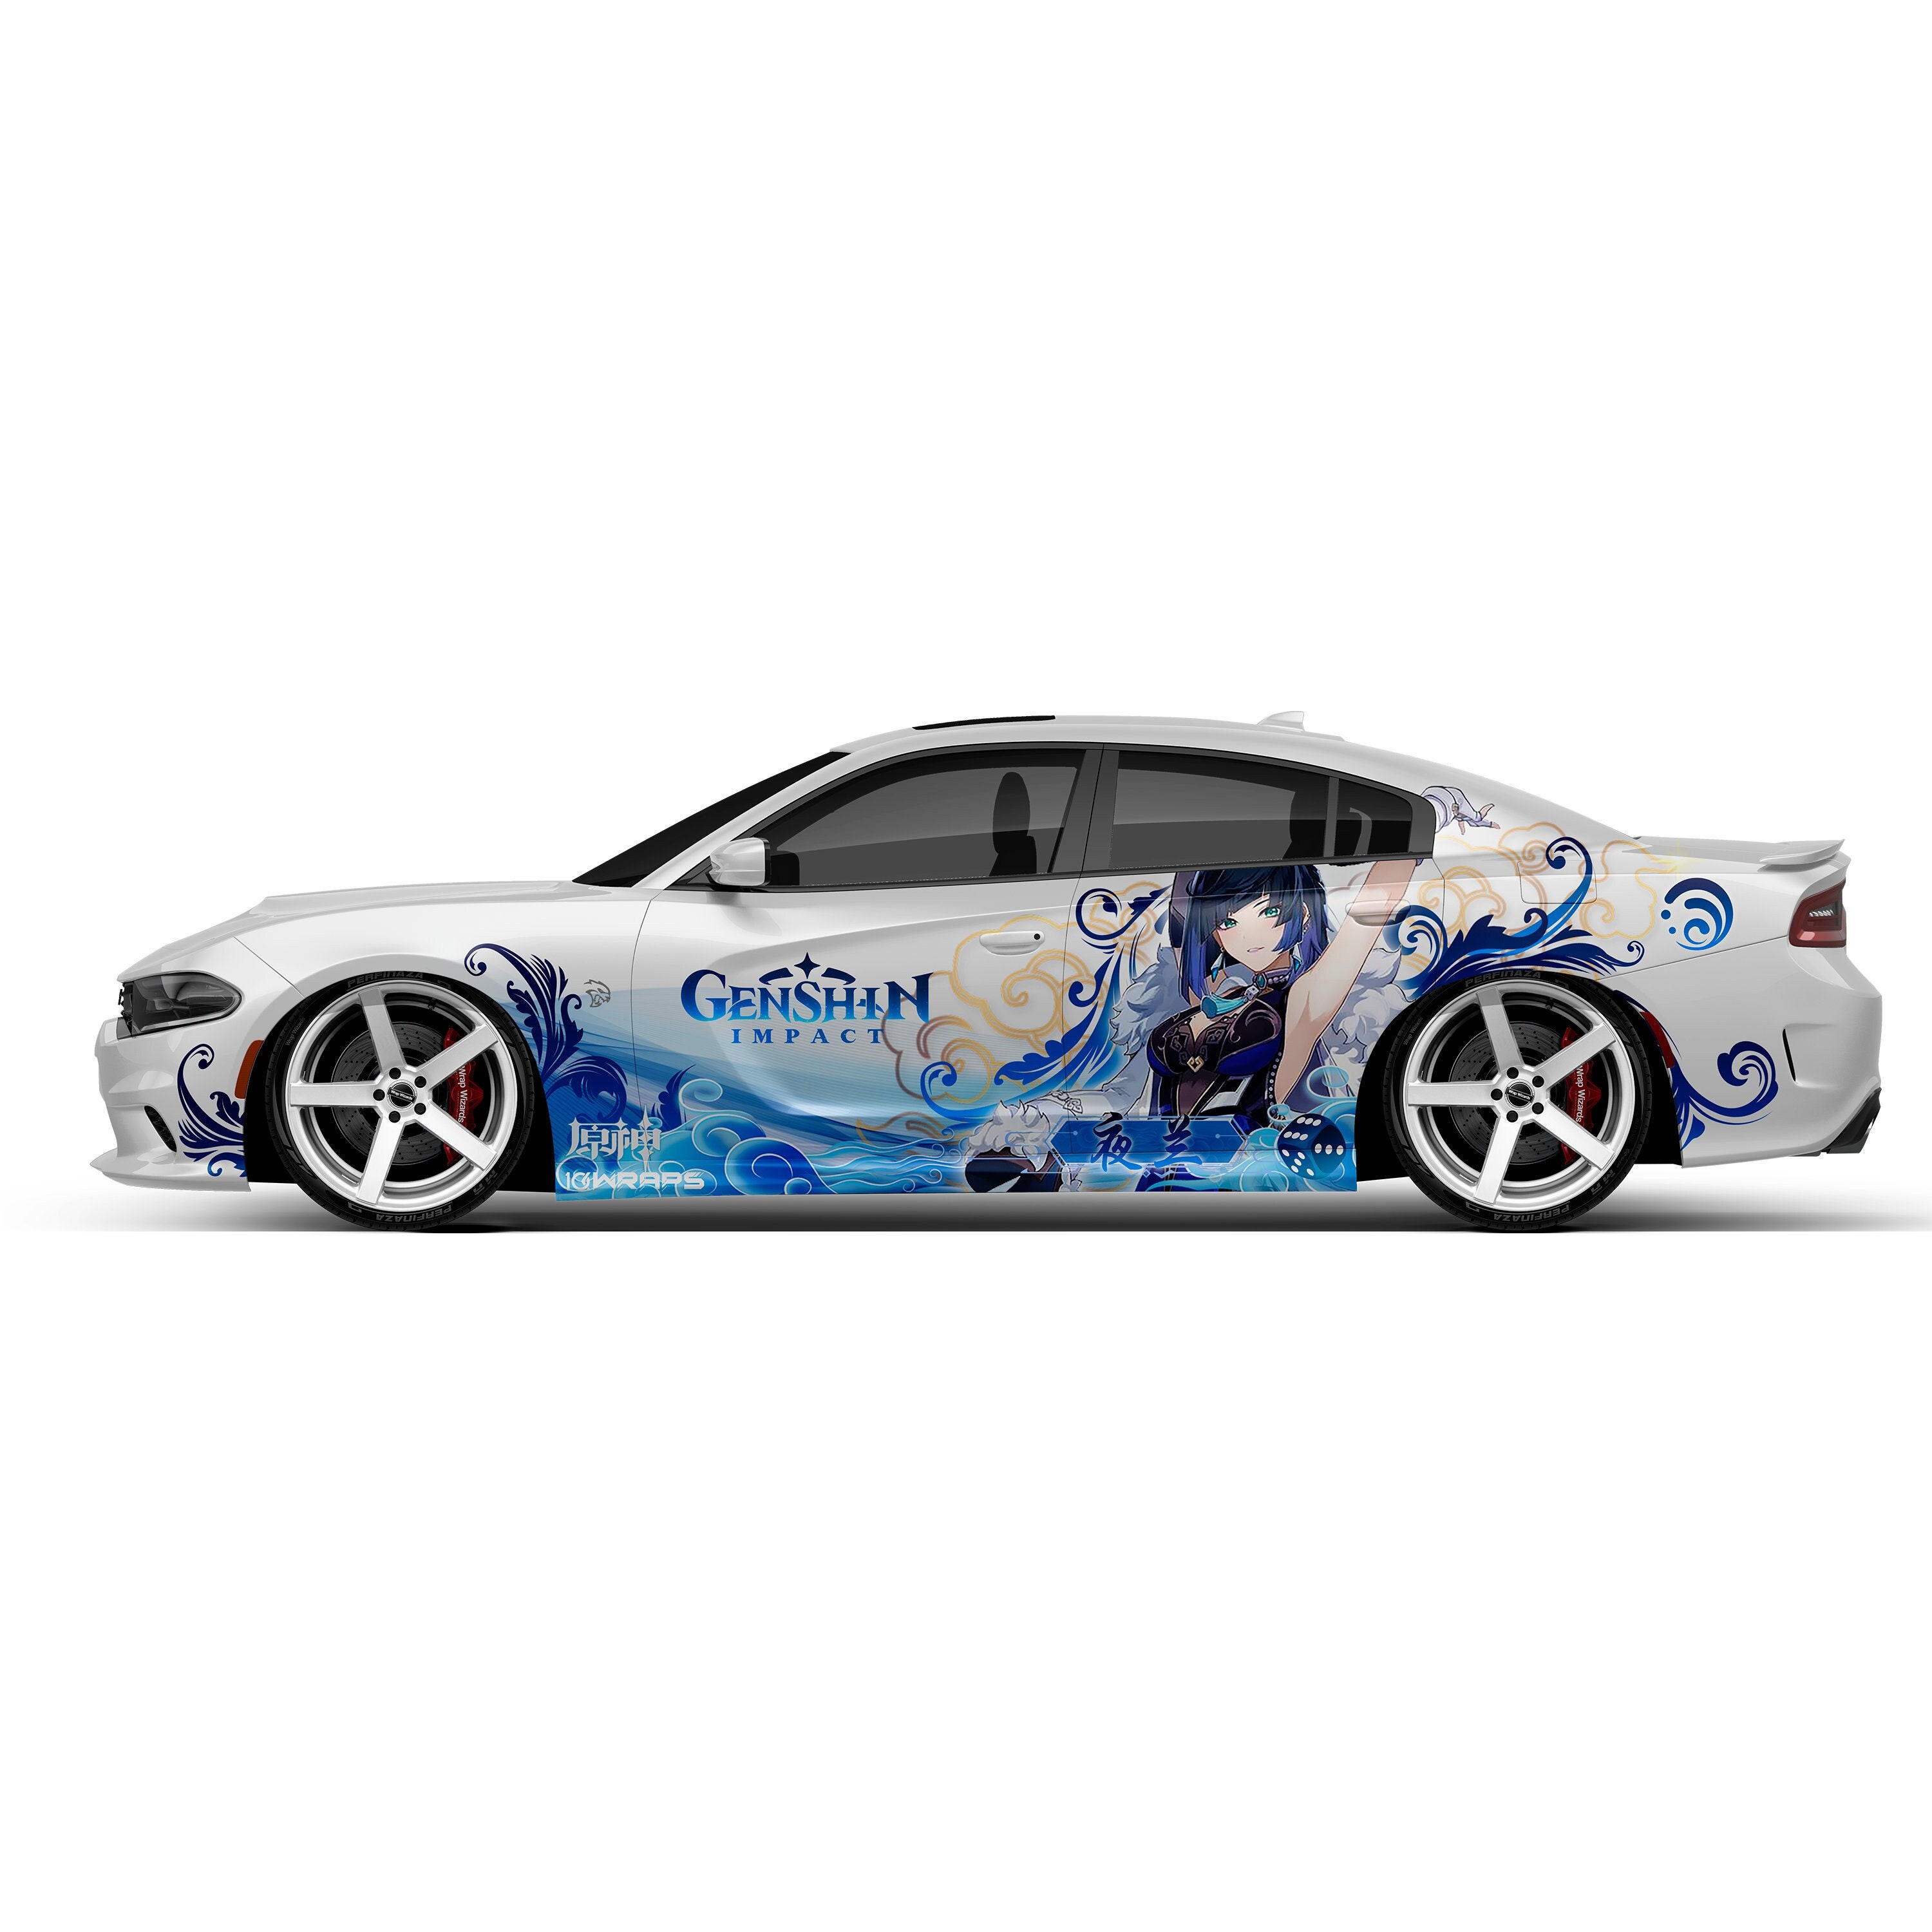 NFL ITASHA anime car wrap vinyl stickers Fit With Any Cars